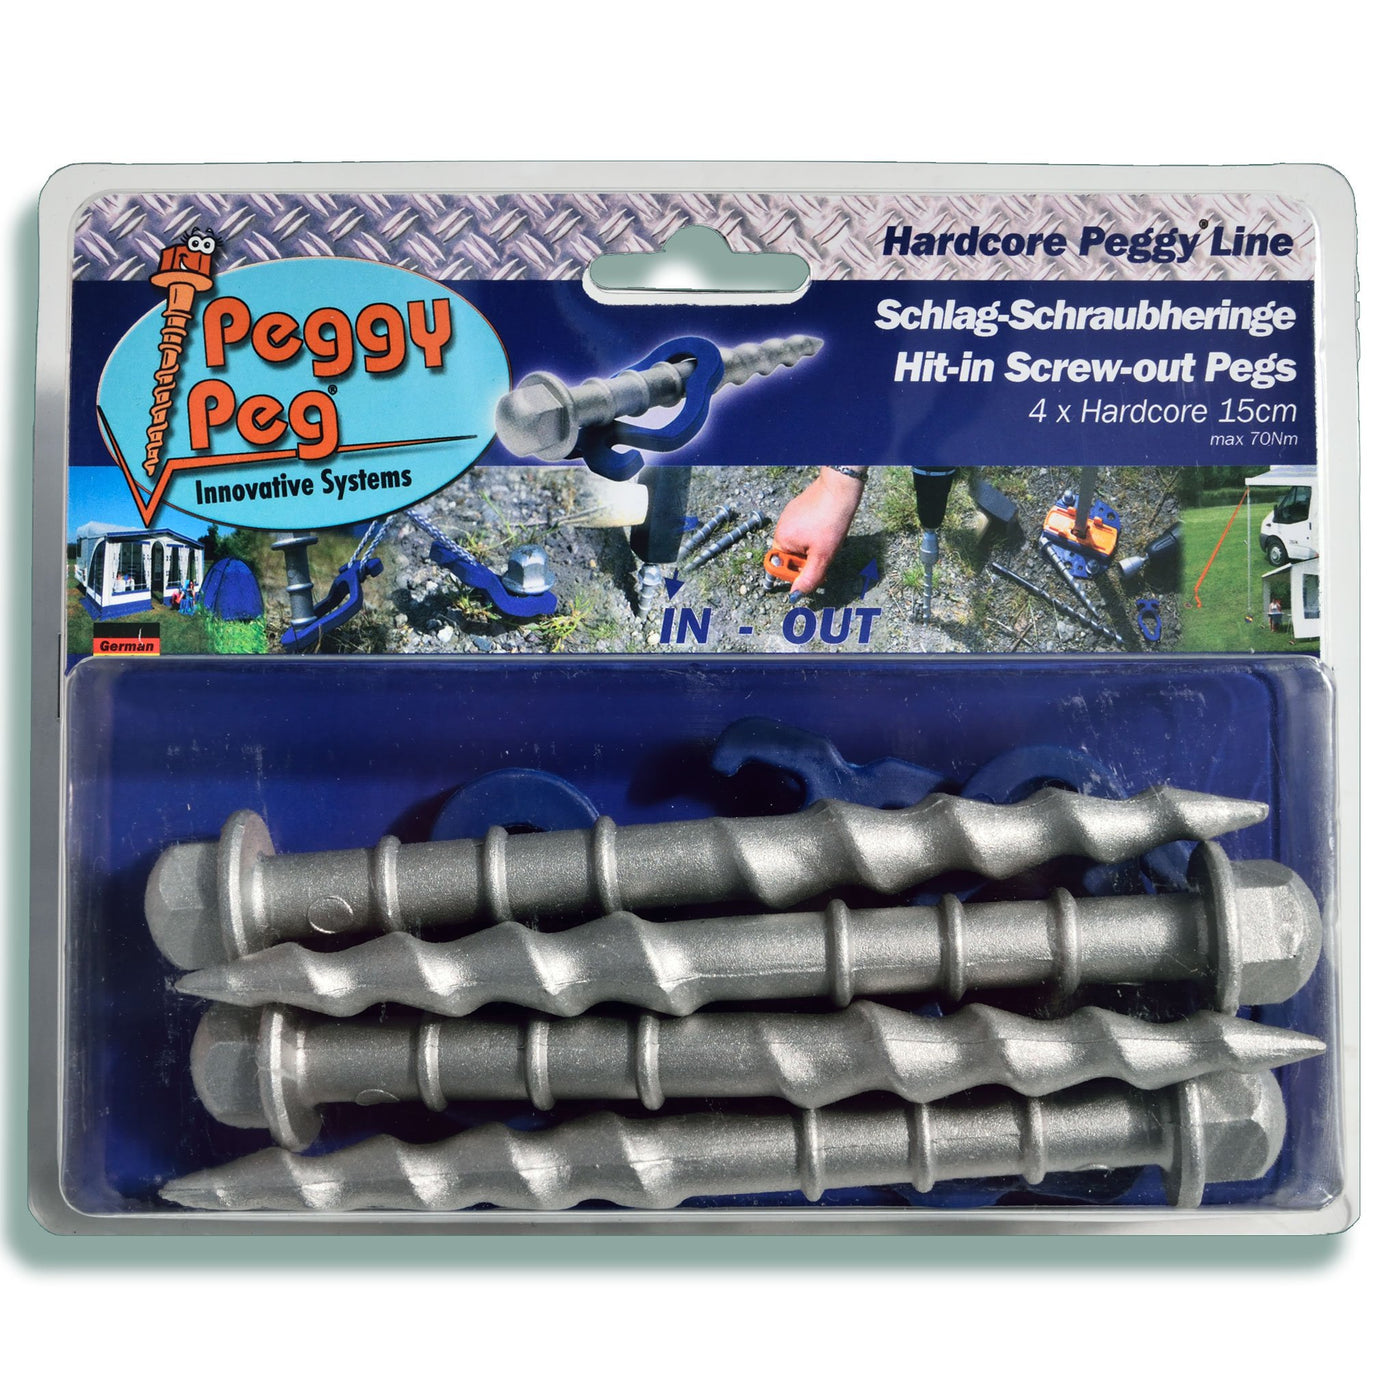 Hit-in Screw-out Peg Hardcore Peggy (HC) 15cm • Pack of 4 (HP61) • for Stony / Rocky Ground